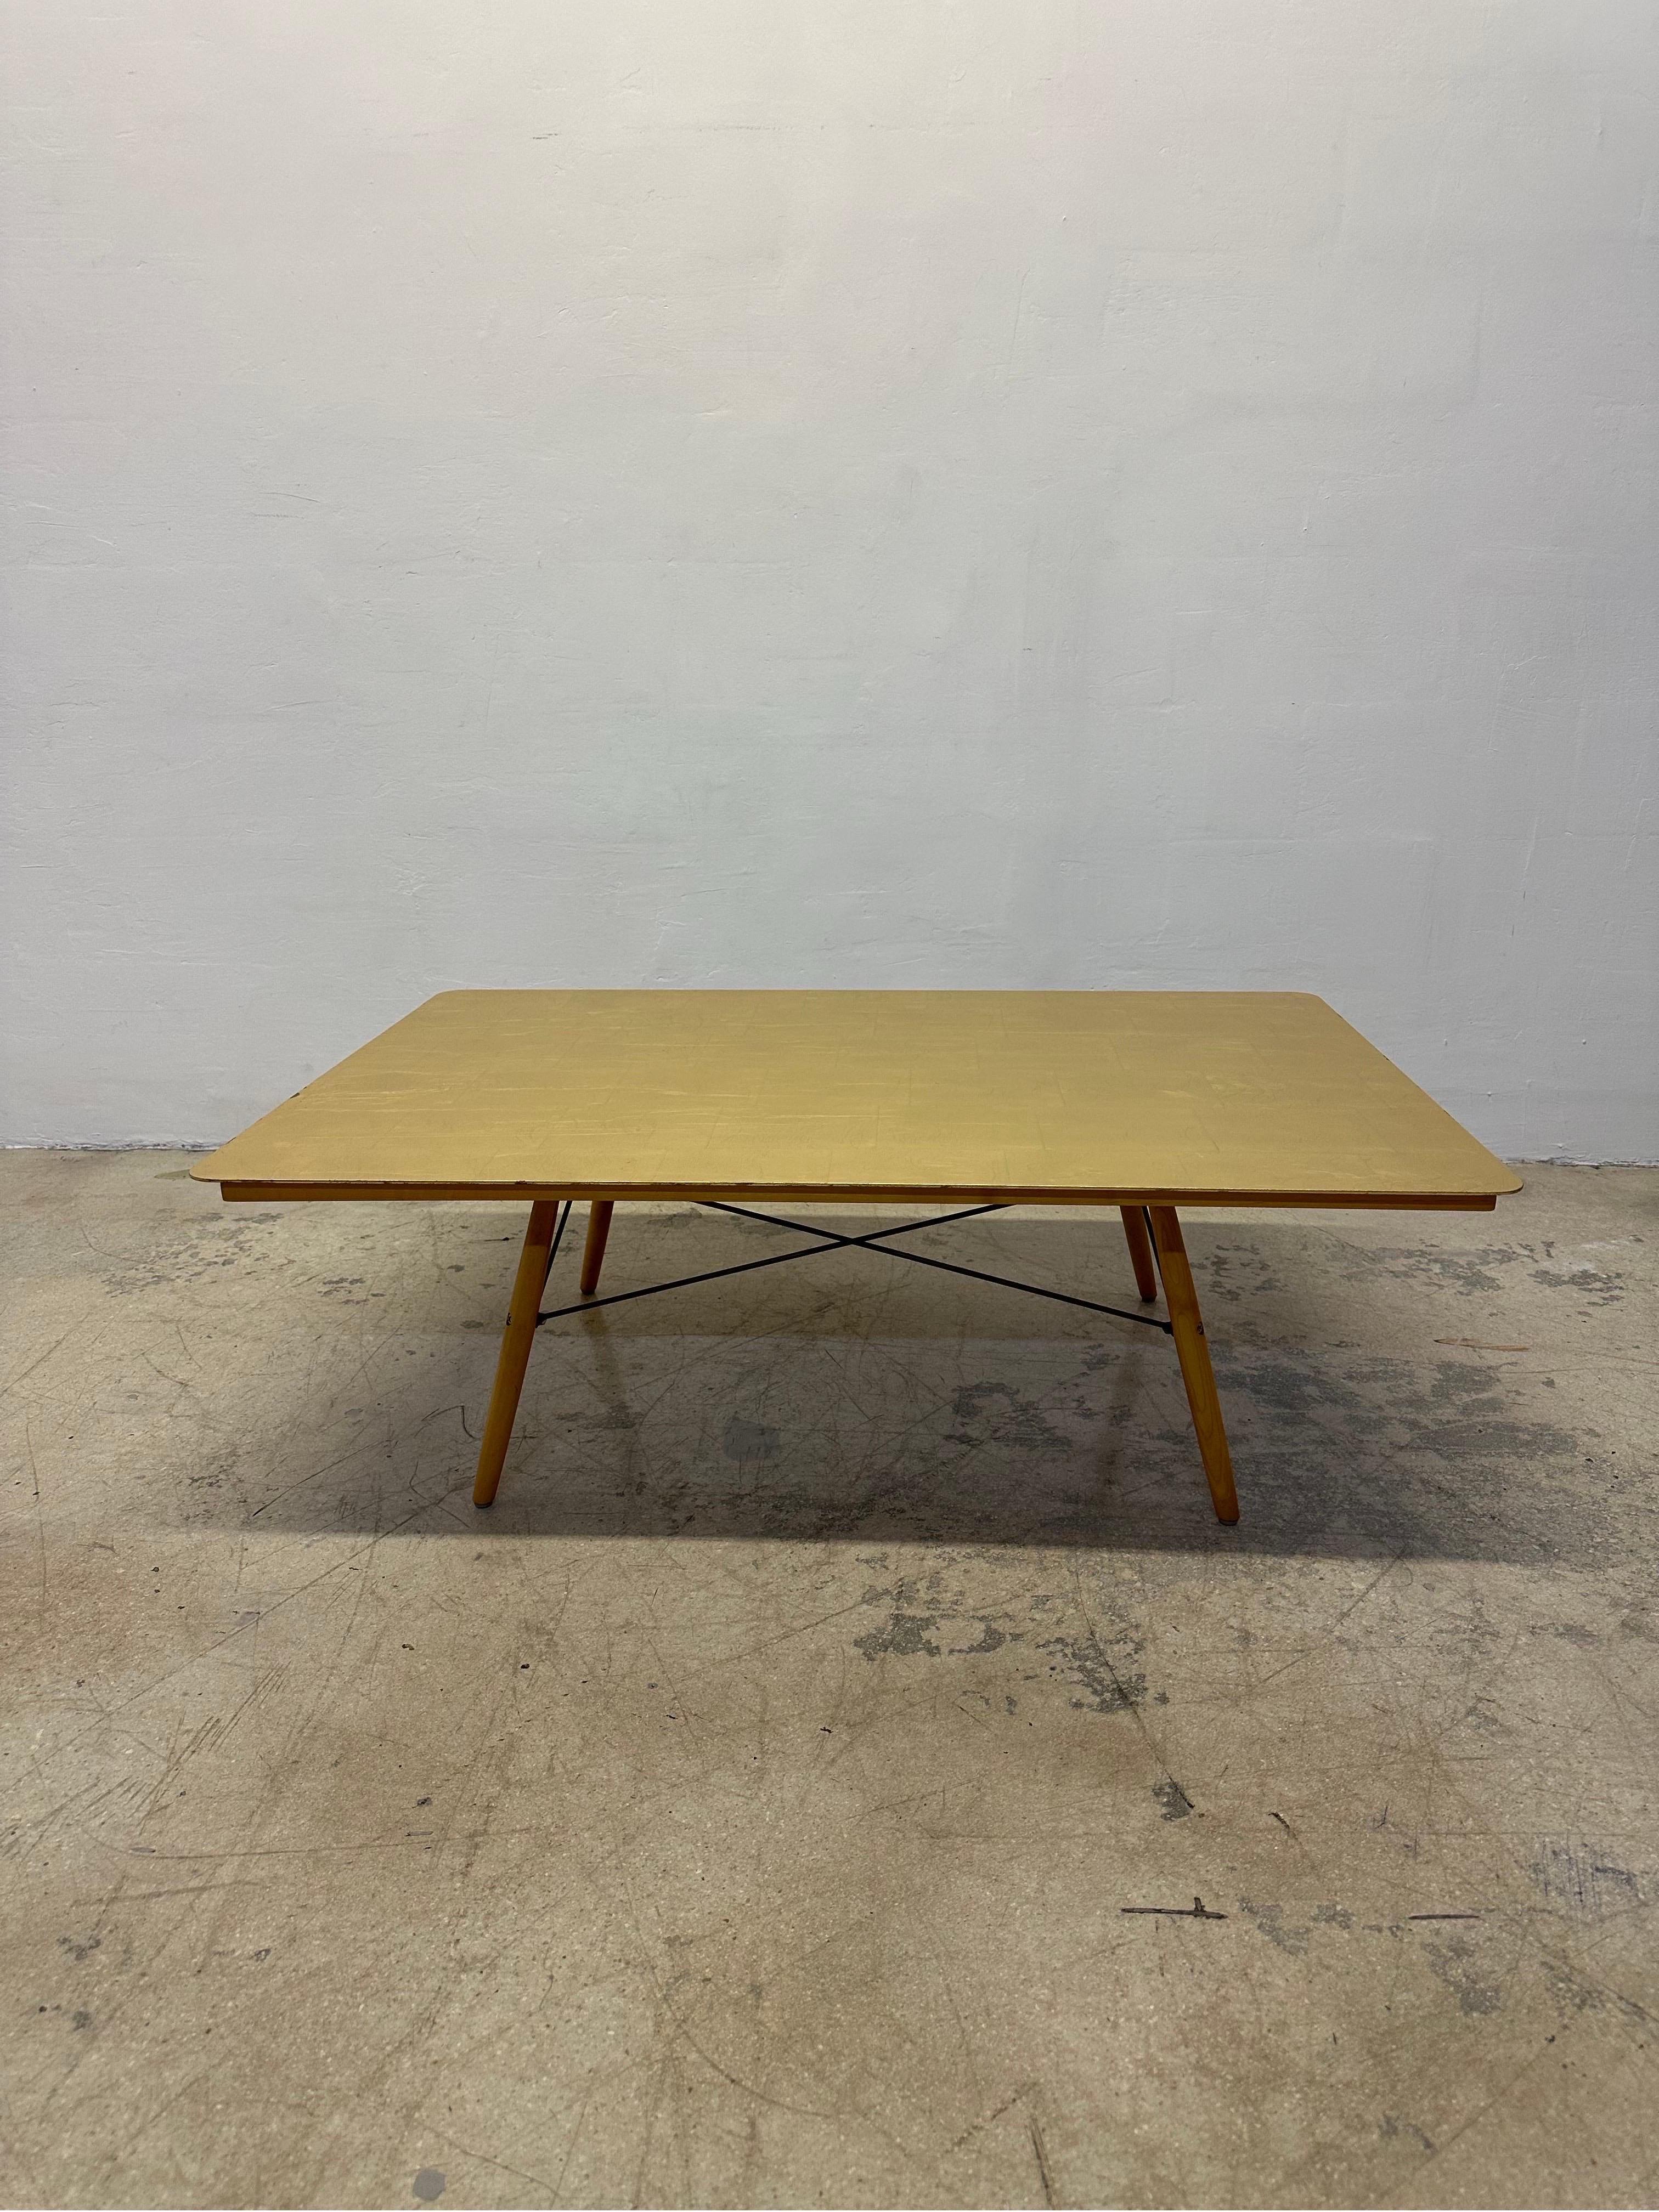 Charles and Ray Eames Palisades House coffee table, anniversary edition.  Rare and collectible; numbered 98/500.

In the late 1990s, to commemorate the 50th anniversary of the Eames house in Pacific Palisades, California, a limited edition of 500